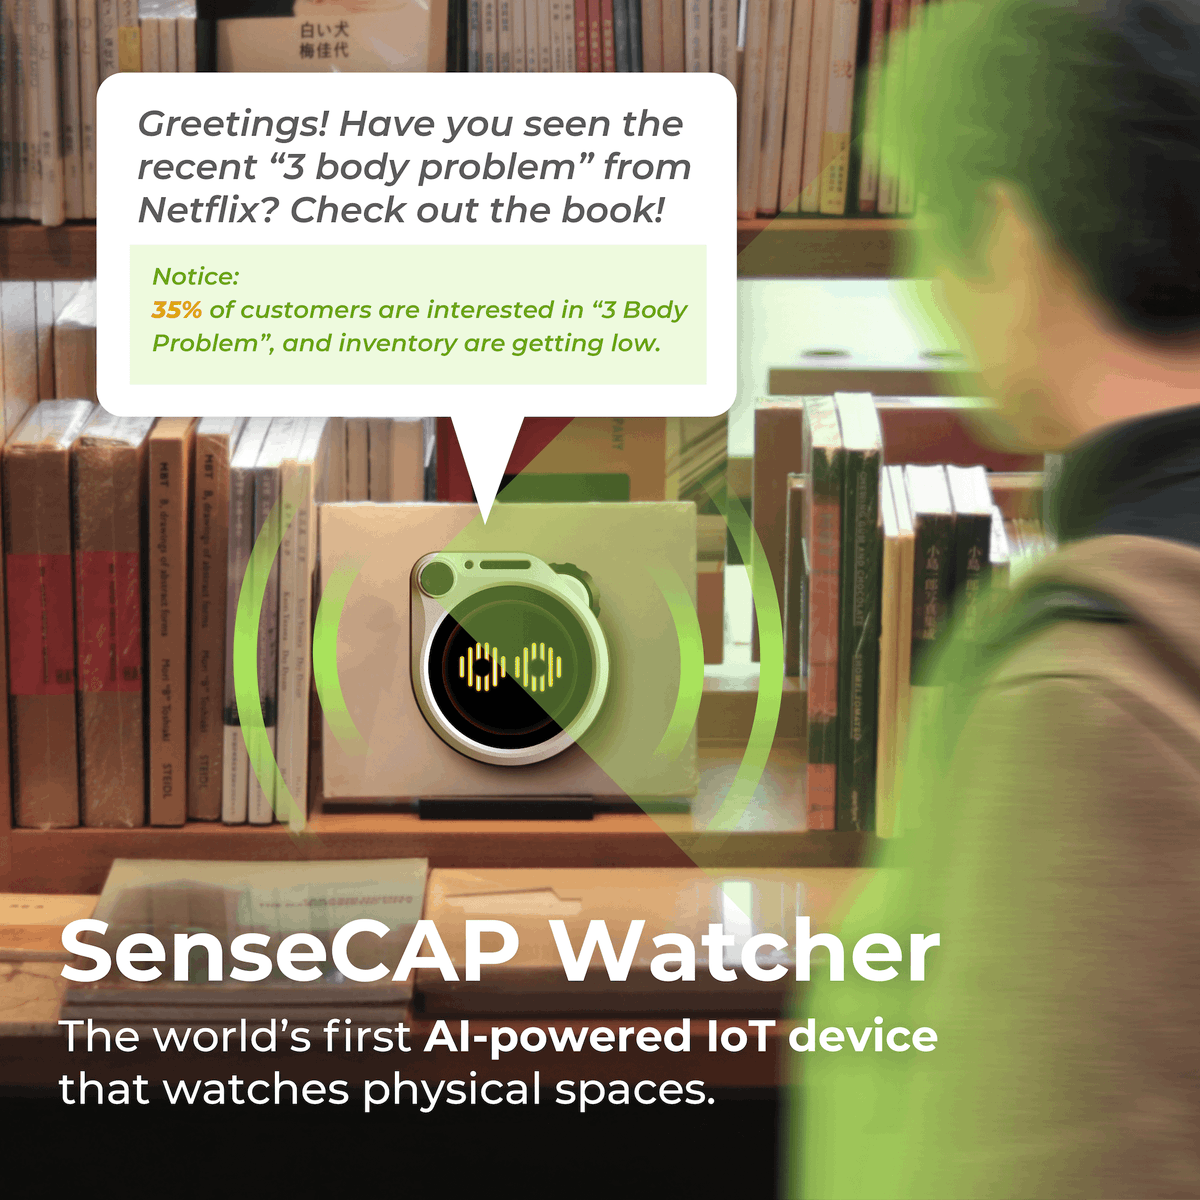 SenseCAP Watcher can identify and track targets of interest, interact with them, comprehend their behaviors and statuses, and spot noteworthy matters, send notices. Here are some examples of what it can do. 
Know more👉 seeedstudio.com/watcher